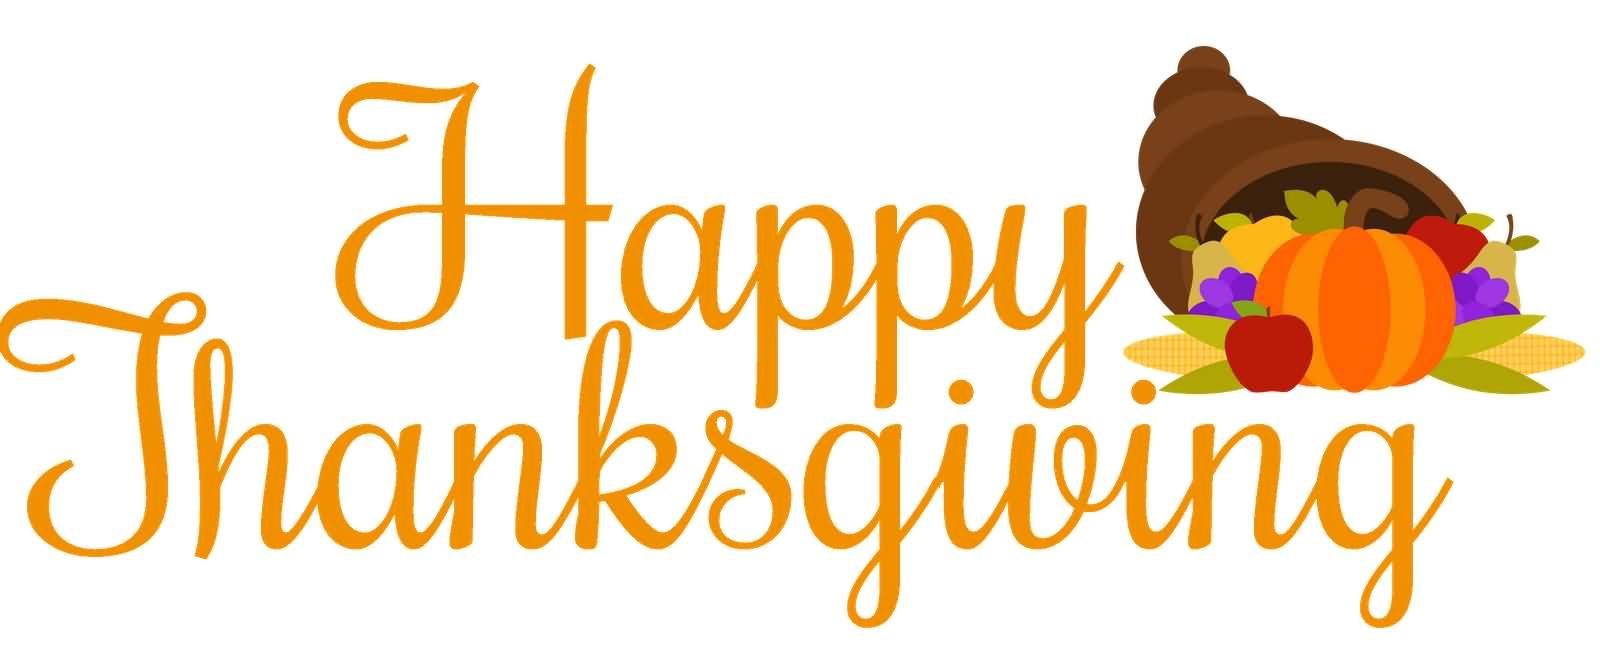 clipart banner happy thanksgiving